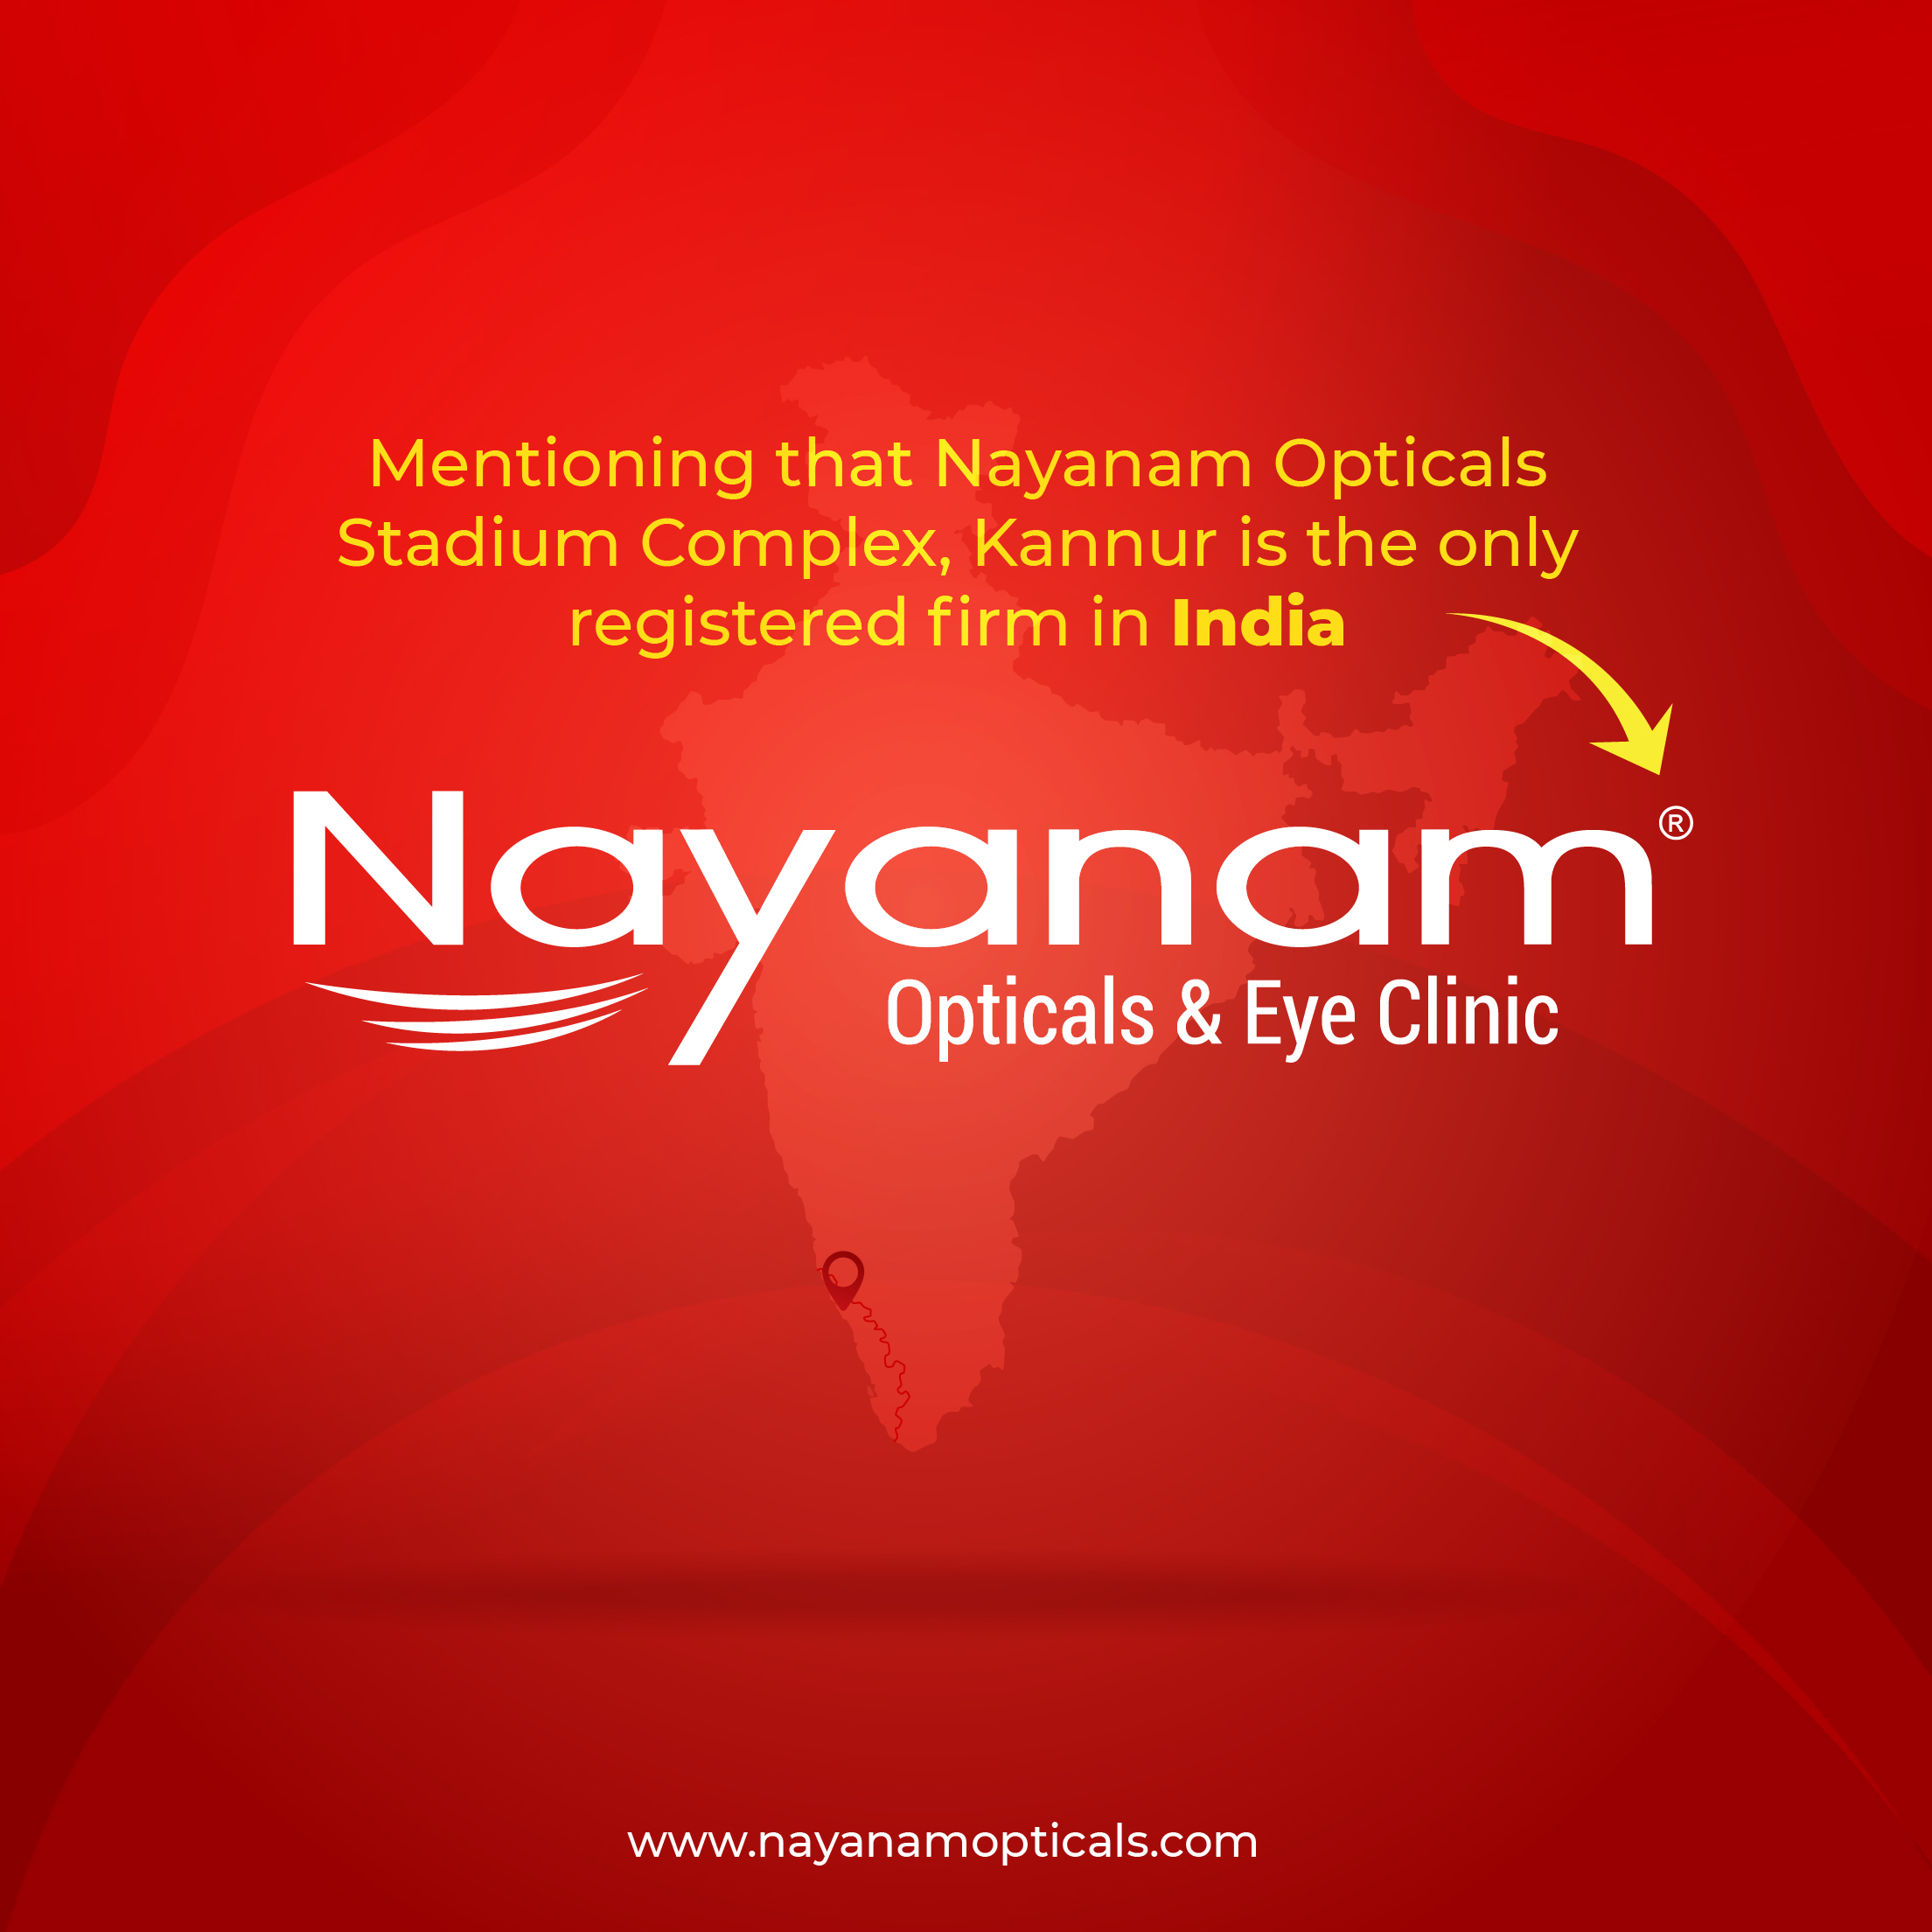 Mentioning that Nayanam Opticals Stadium Complex, Kannur is the only registered firm in India.